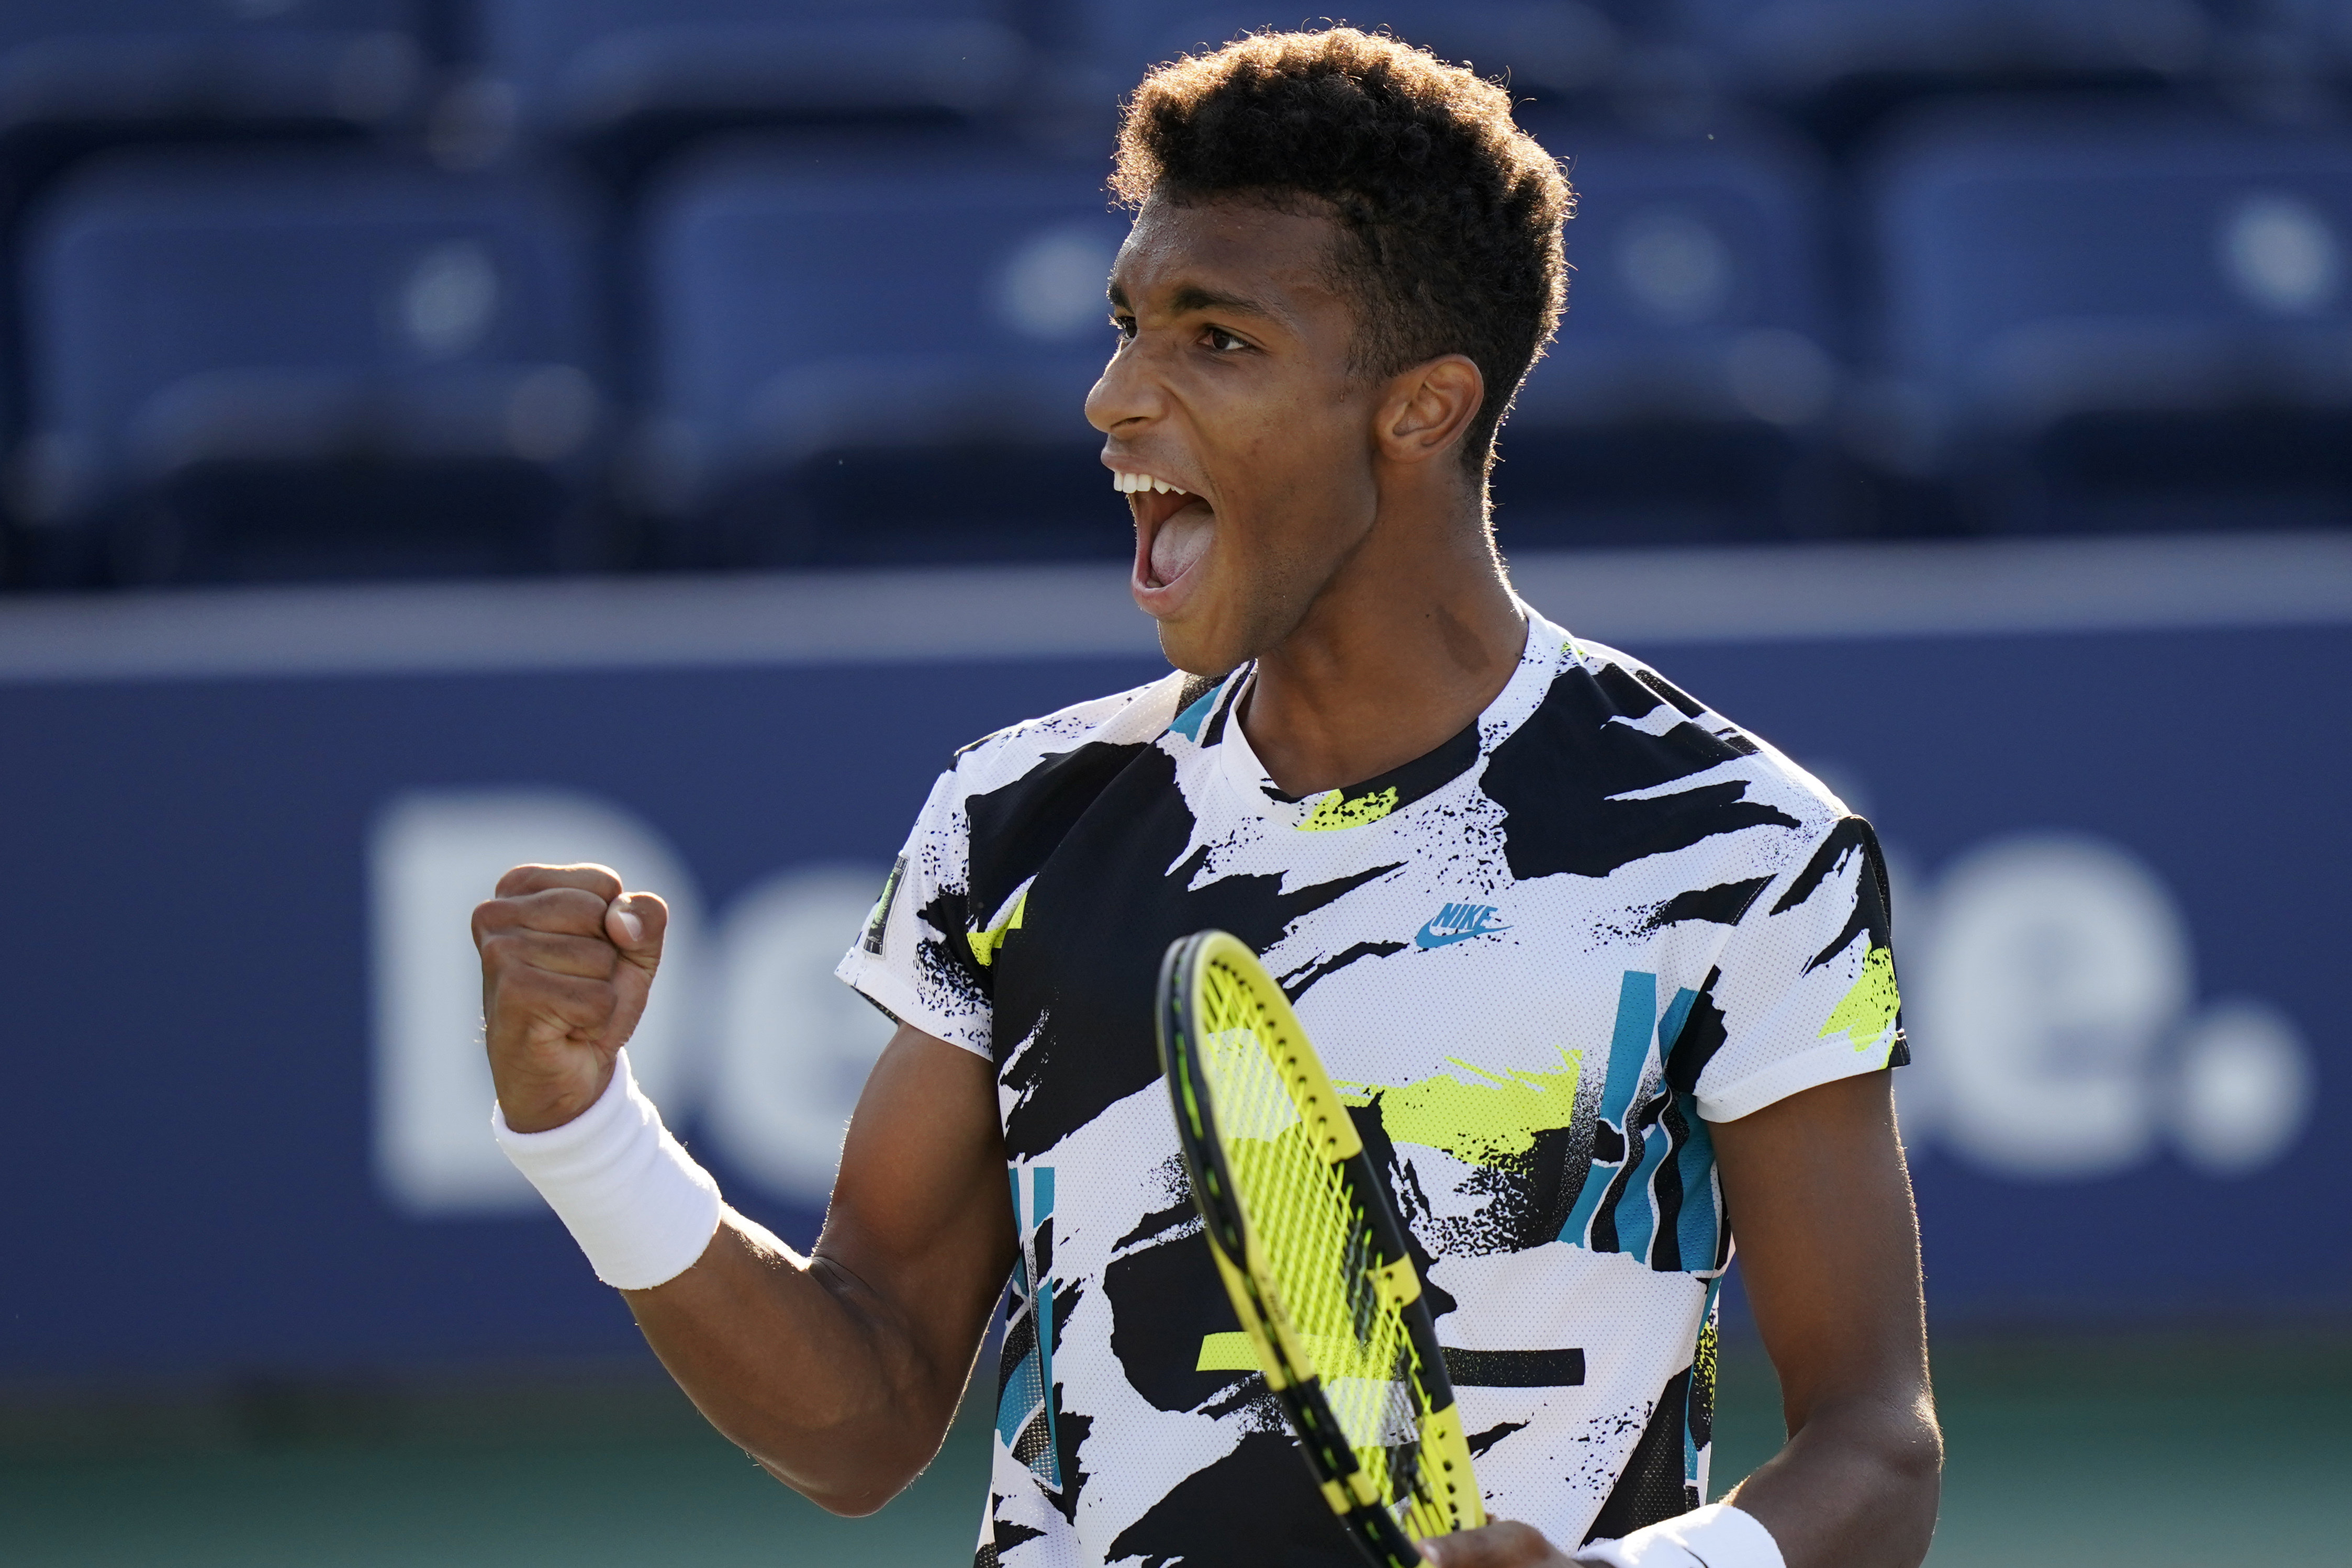 Felix Auger-Aliassime, of Canada, celebrates after winning a match against Corentin Moutet, of France, during the third round of the US Open tennis championships, Saturday, Sept. 5, 2020, in New York. (AP Photo/Frank Franklin II)